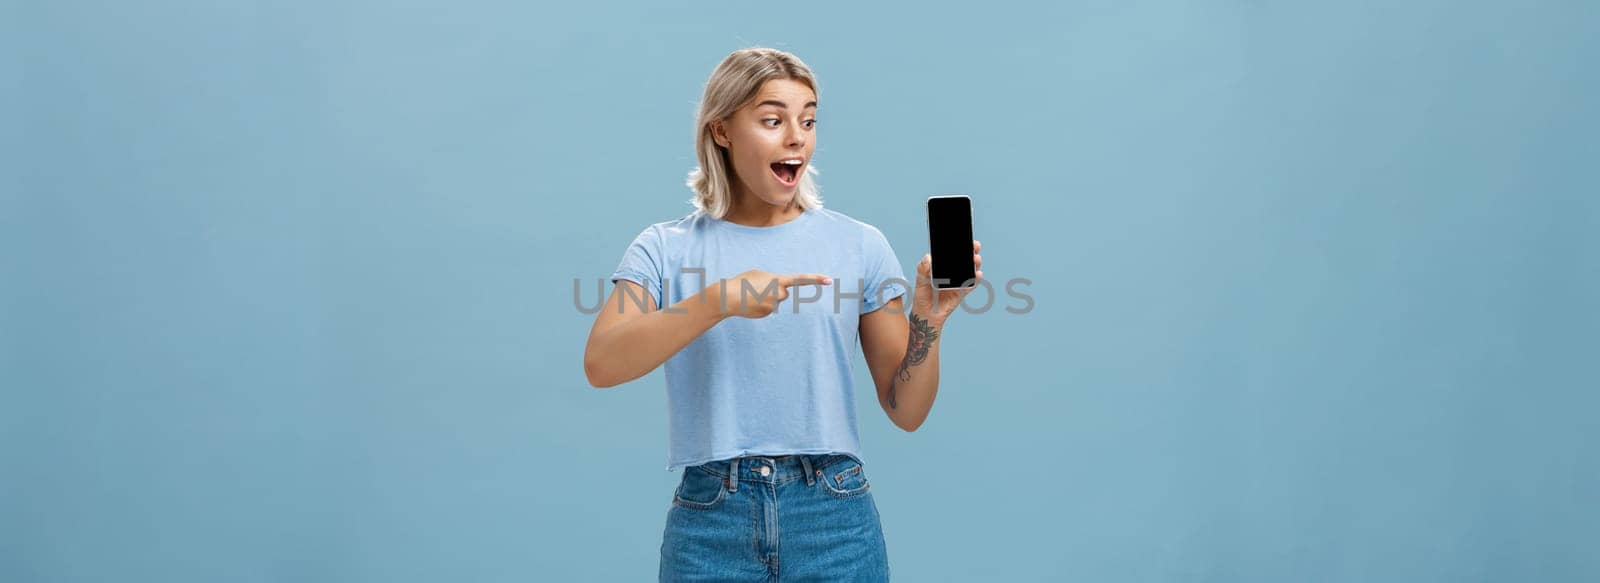 Look at this awesome smartphone. Impressed enthusiastic good-looking female blonde with cool tattoo on arm dropping jaw from thrill and excitement pointing at device screen over blue background.